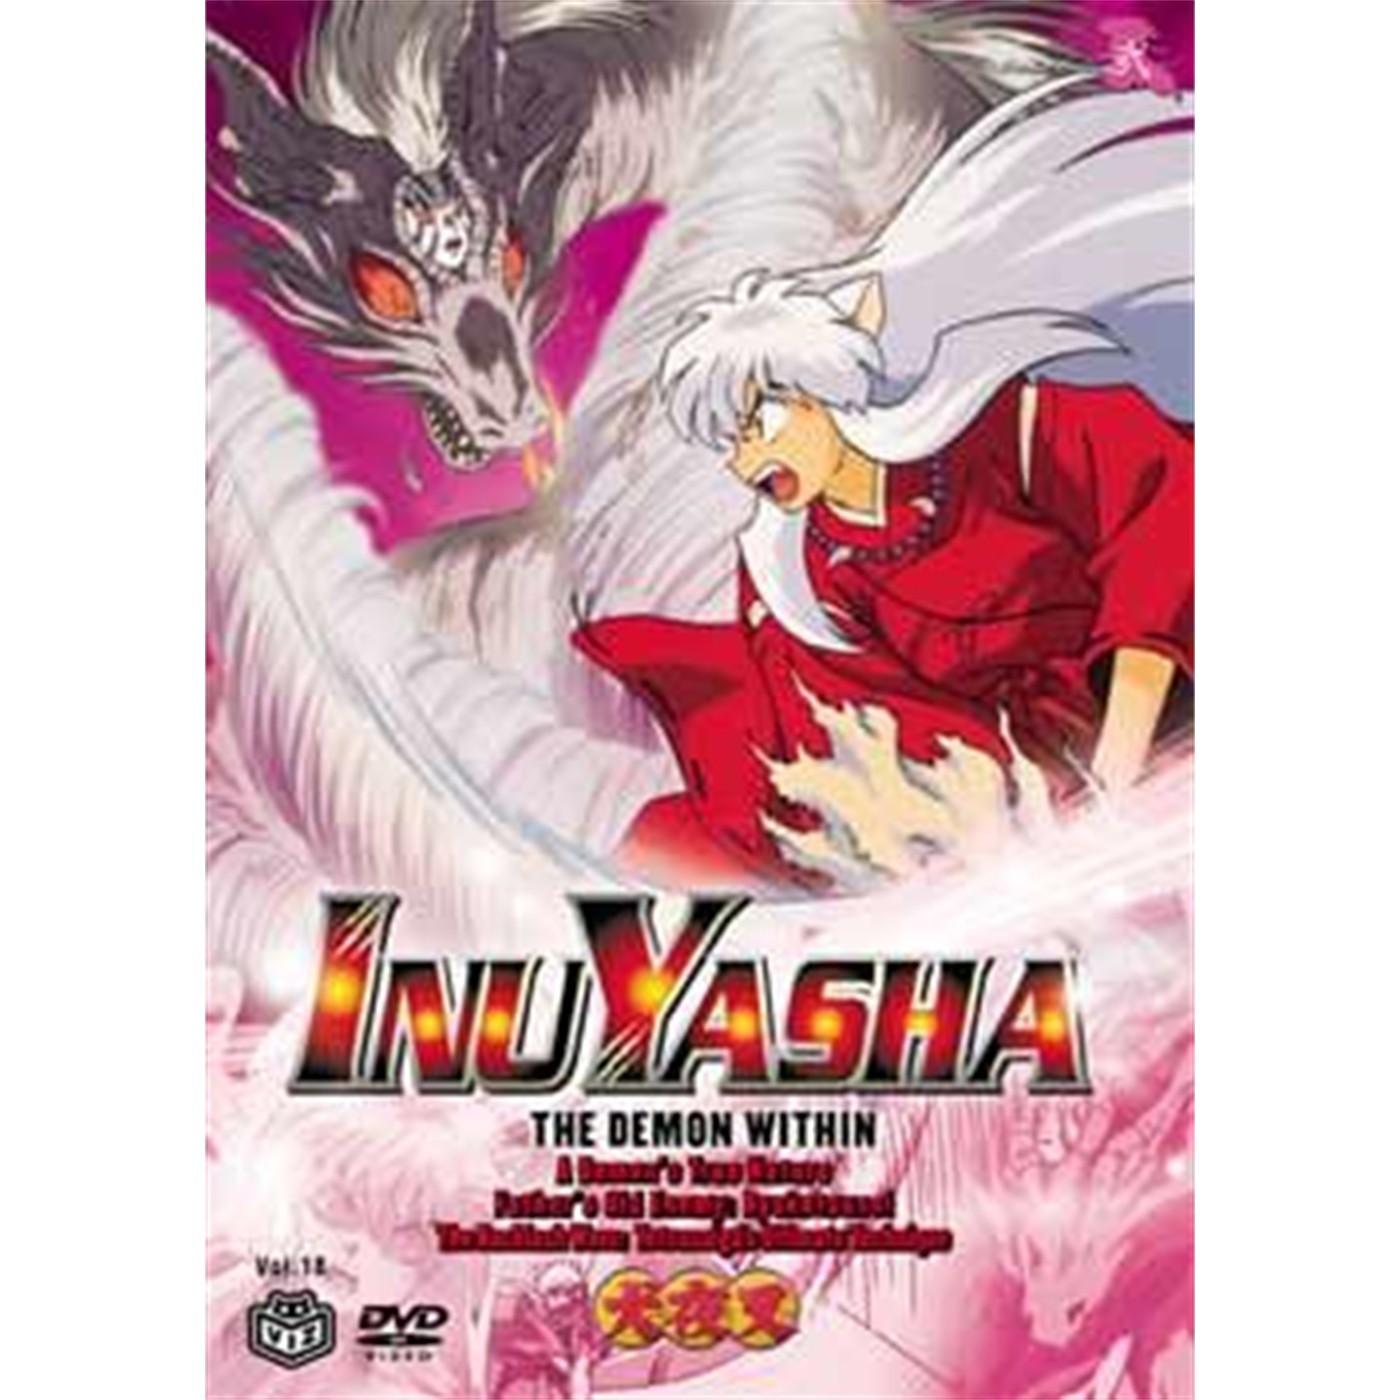 InuYasha, Vol. 18: The Demon Within (DVD)